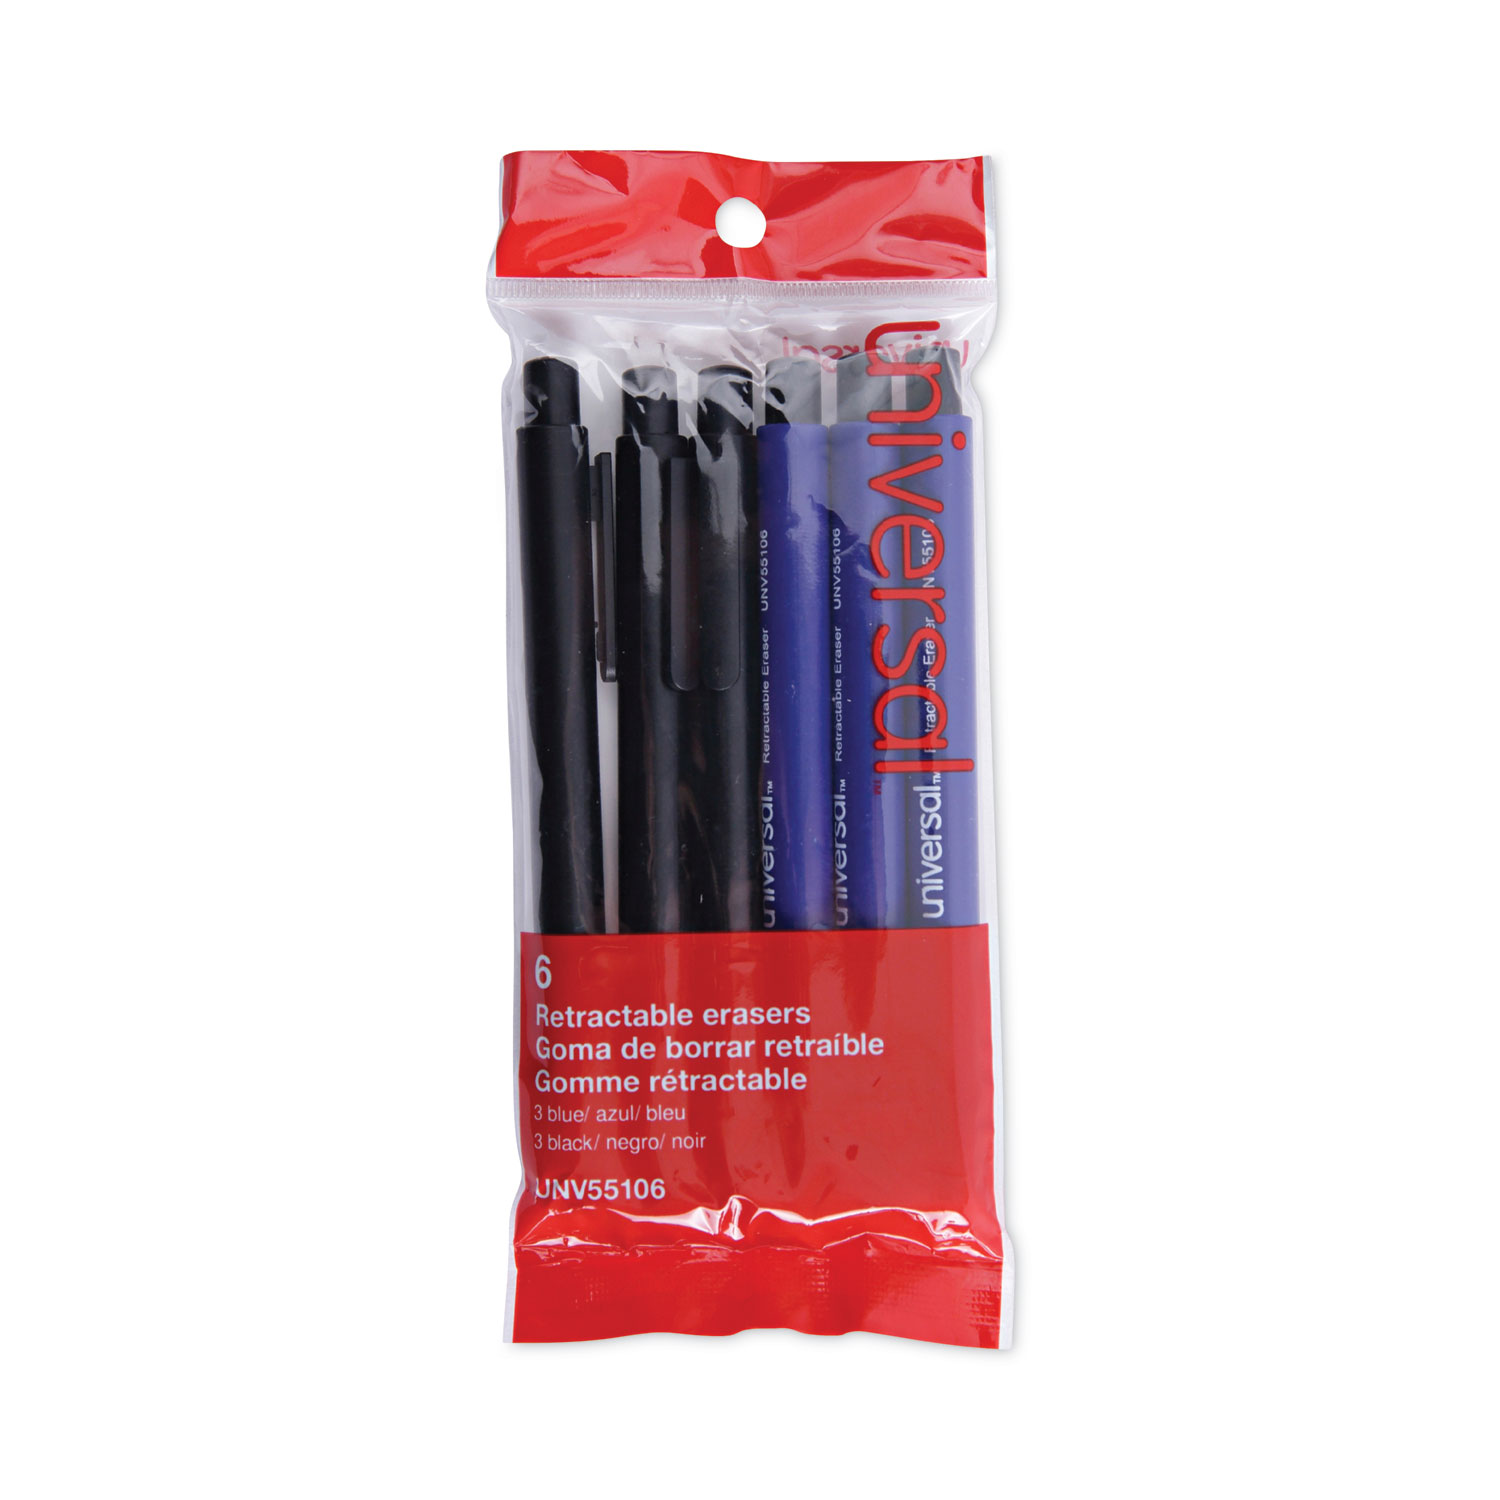 Sand Eraser 3-Pack, Designed to Remove Colored Pencil and Ink Markings